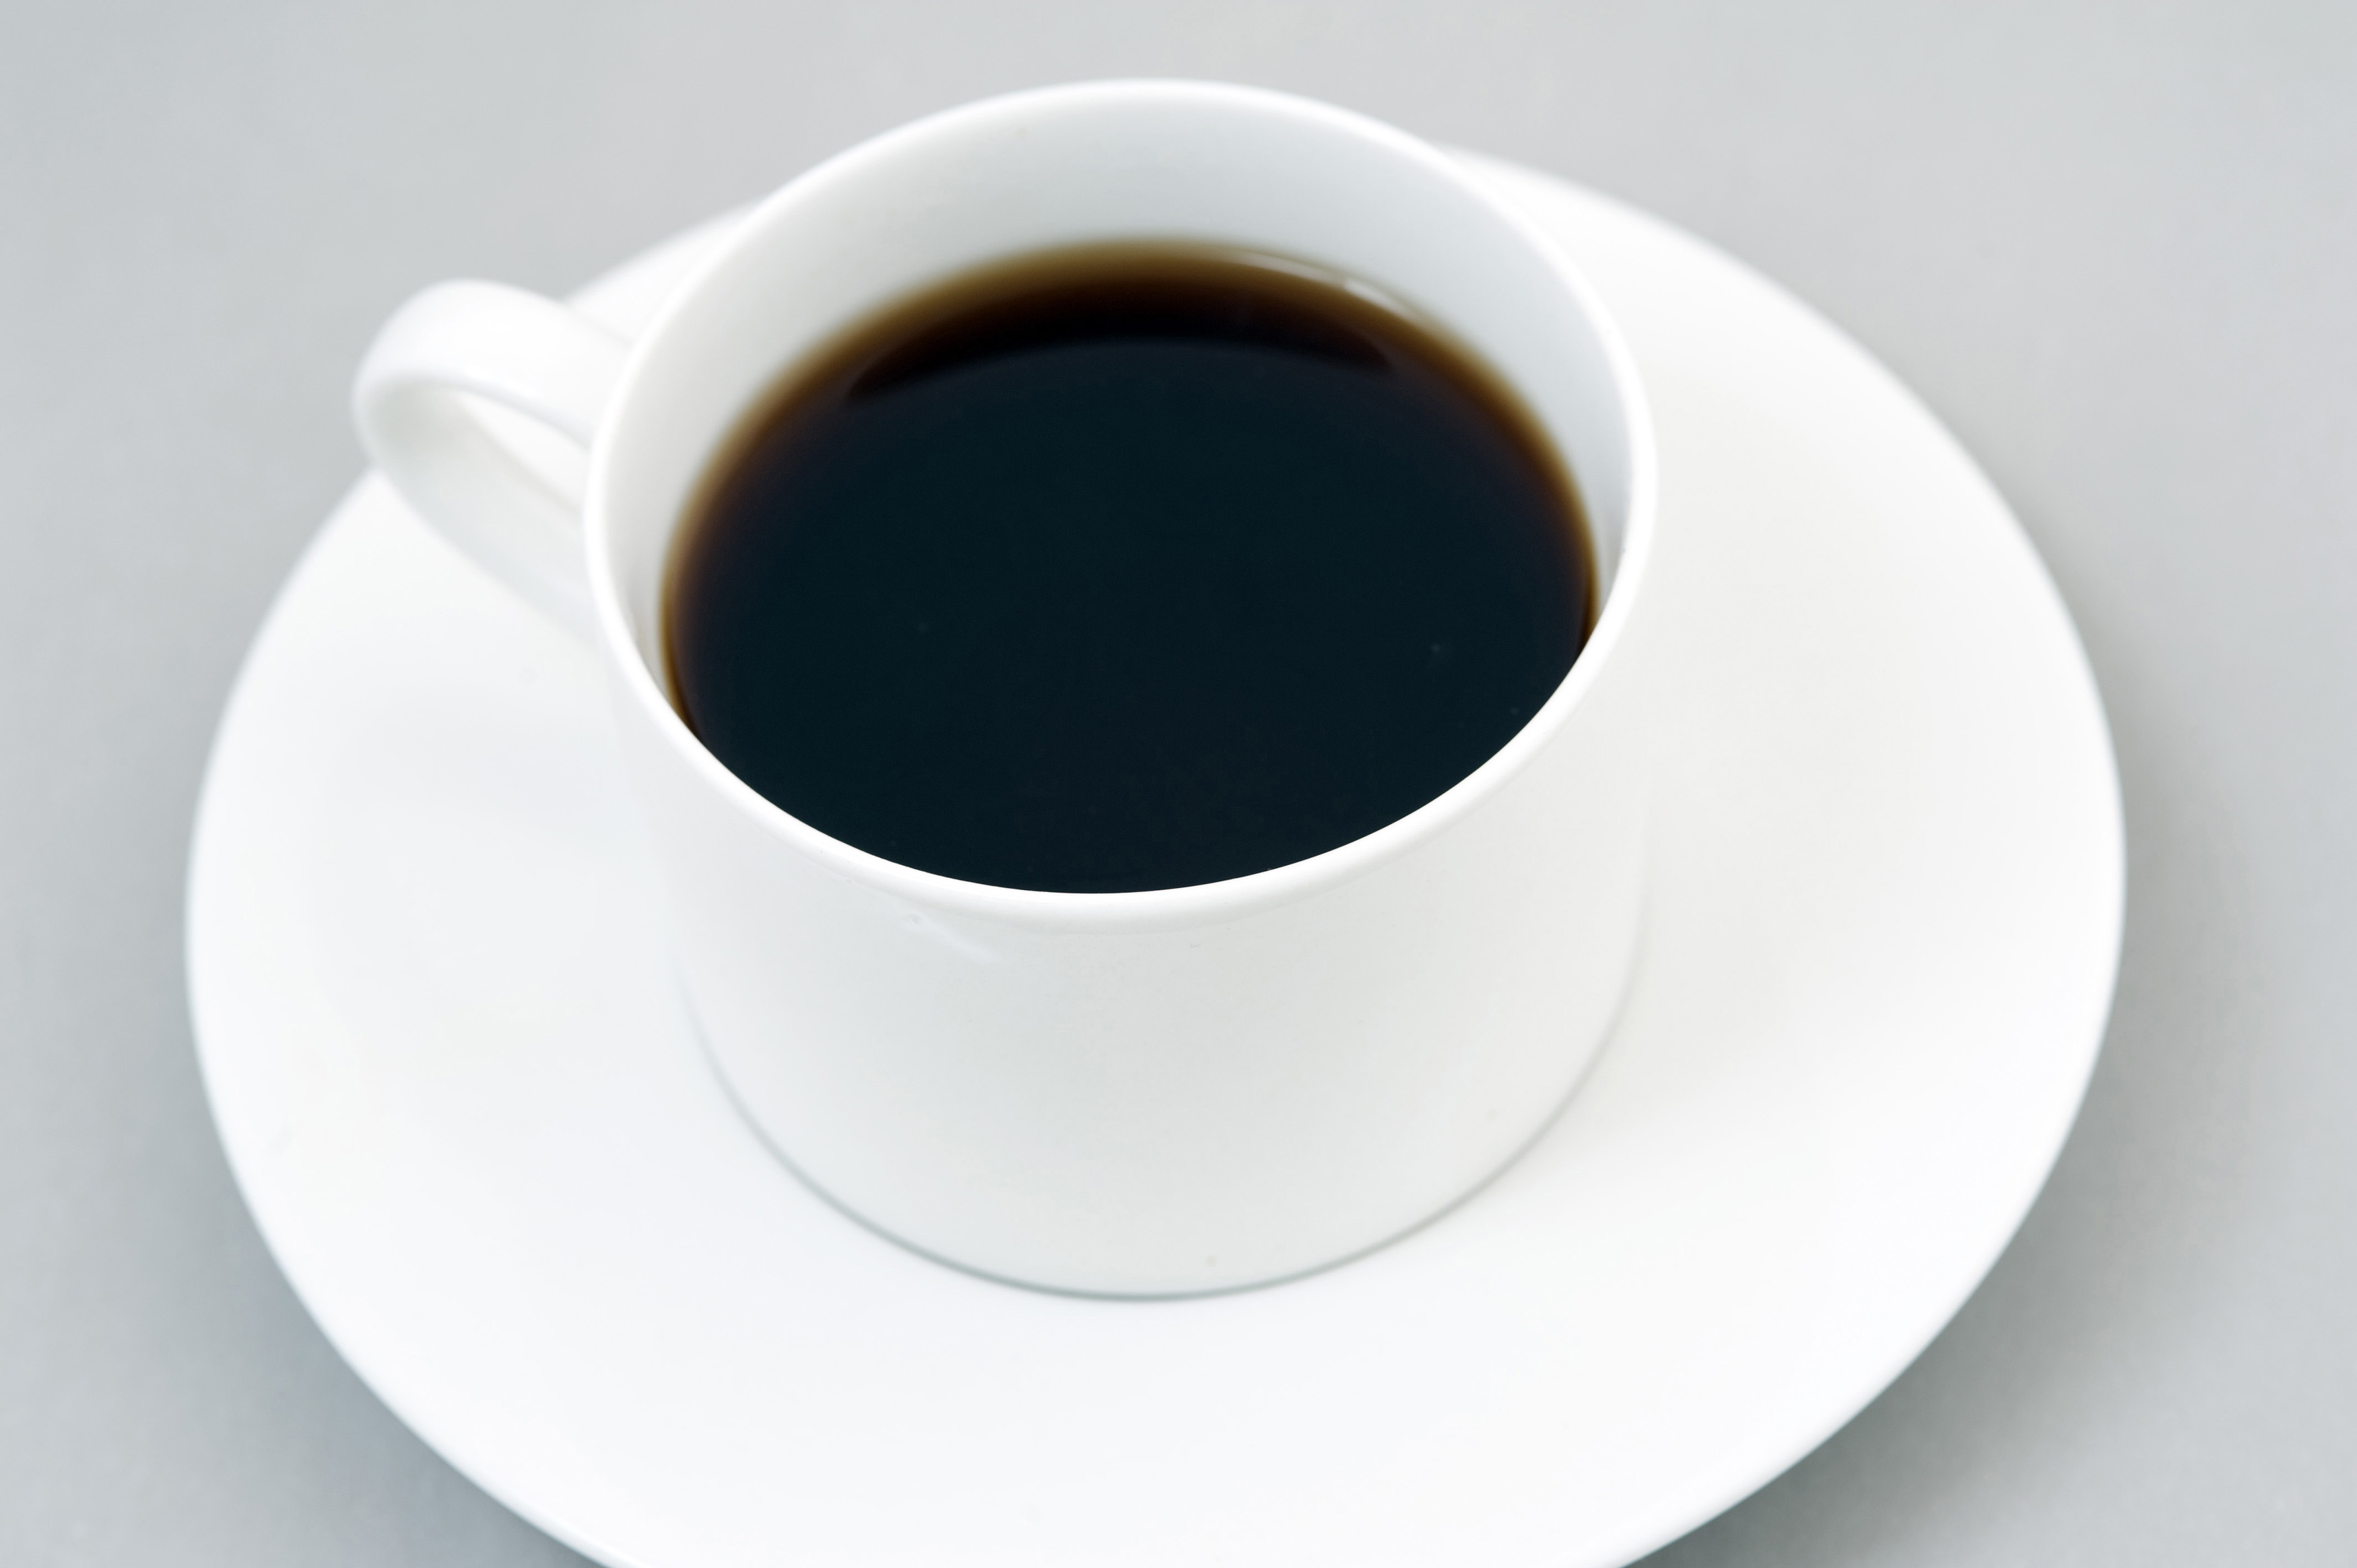 Free Stock Photo 11611 Cup of black coffee on saucer | freeimageslive